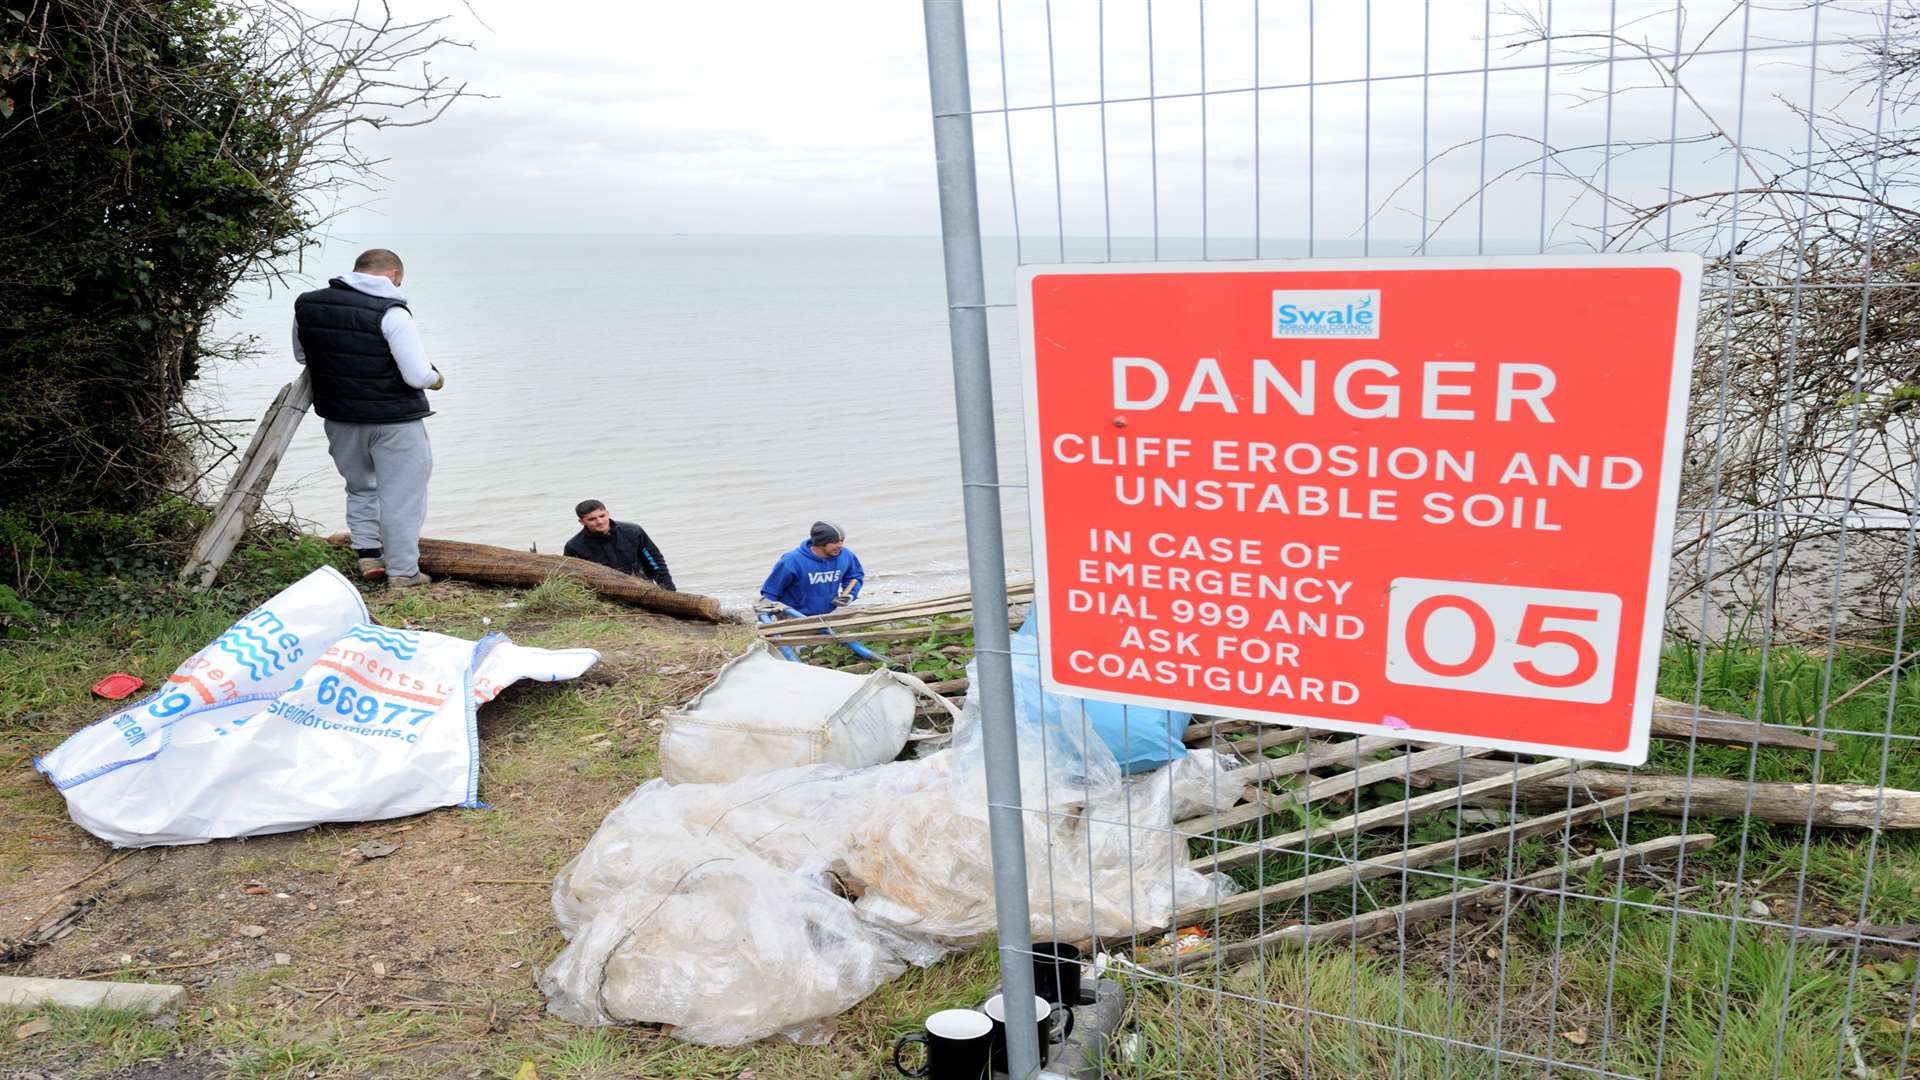 Contractors putting in netting to prevent cliff erosion